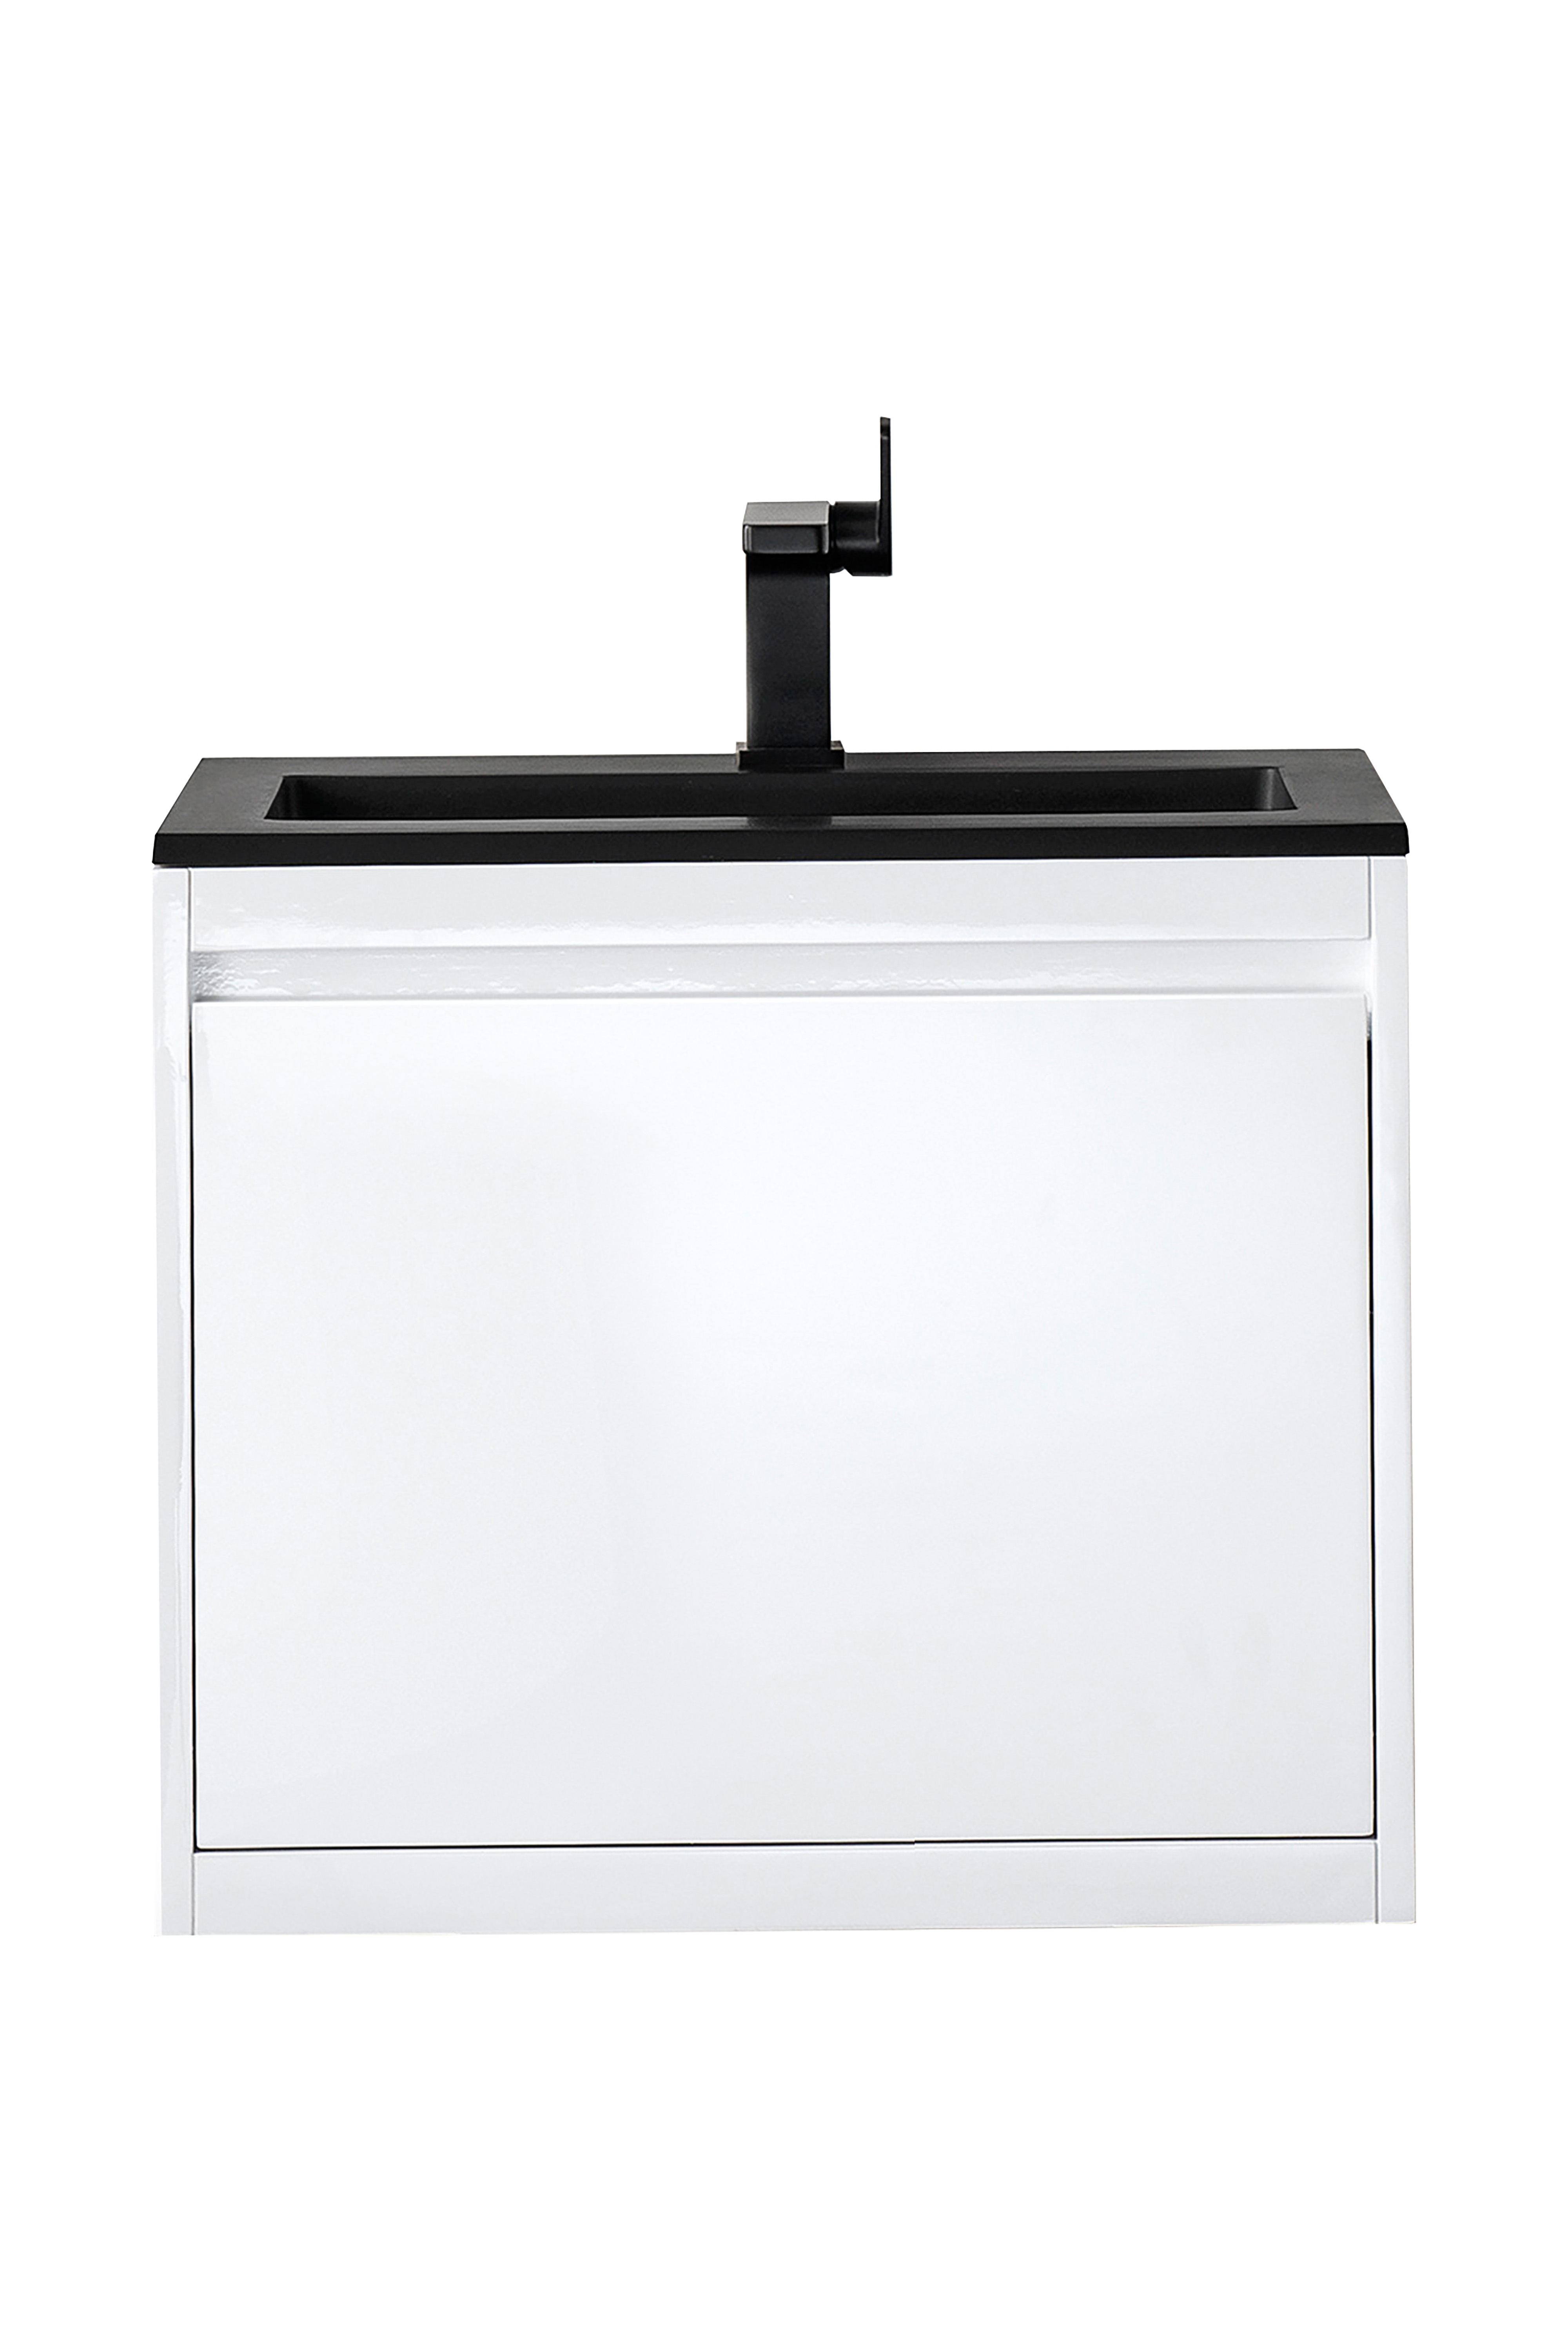 James Martin 801V23.6GWCHB Milan 23.6" Single Vanity Cabinet, Glossy White w/Charcoal Black Composite Top